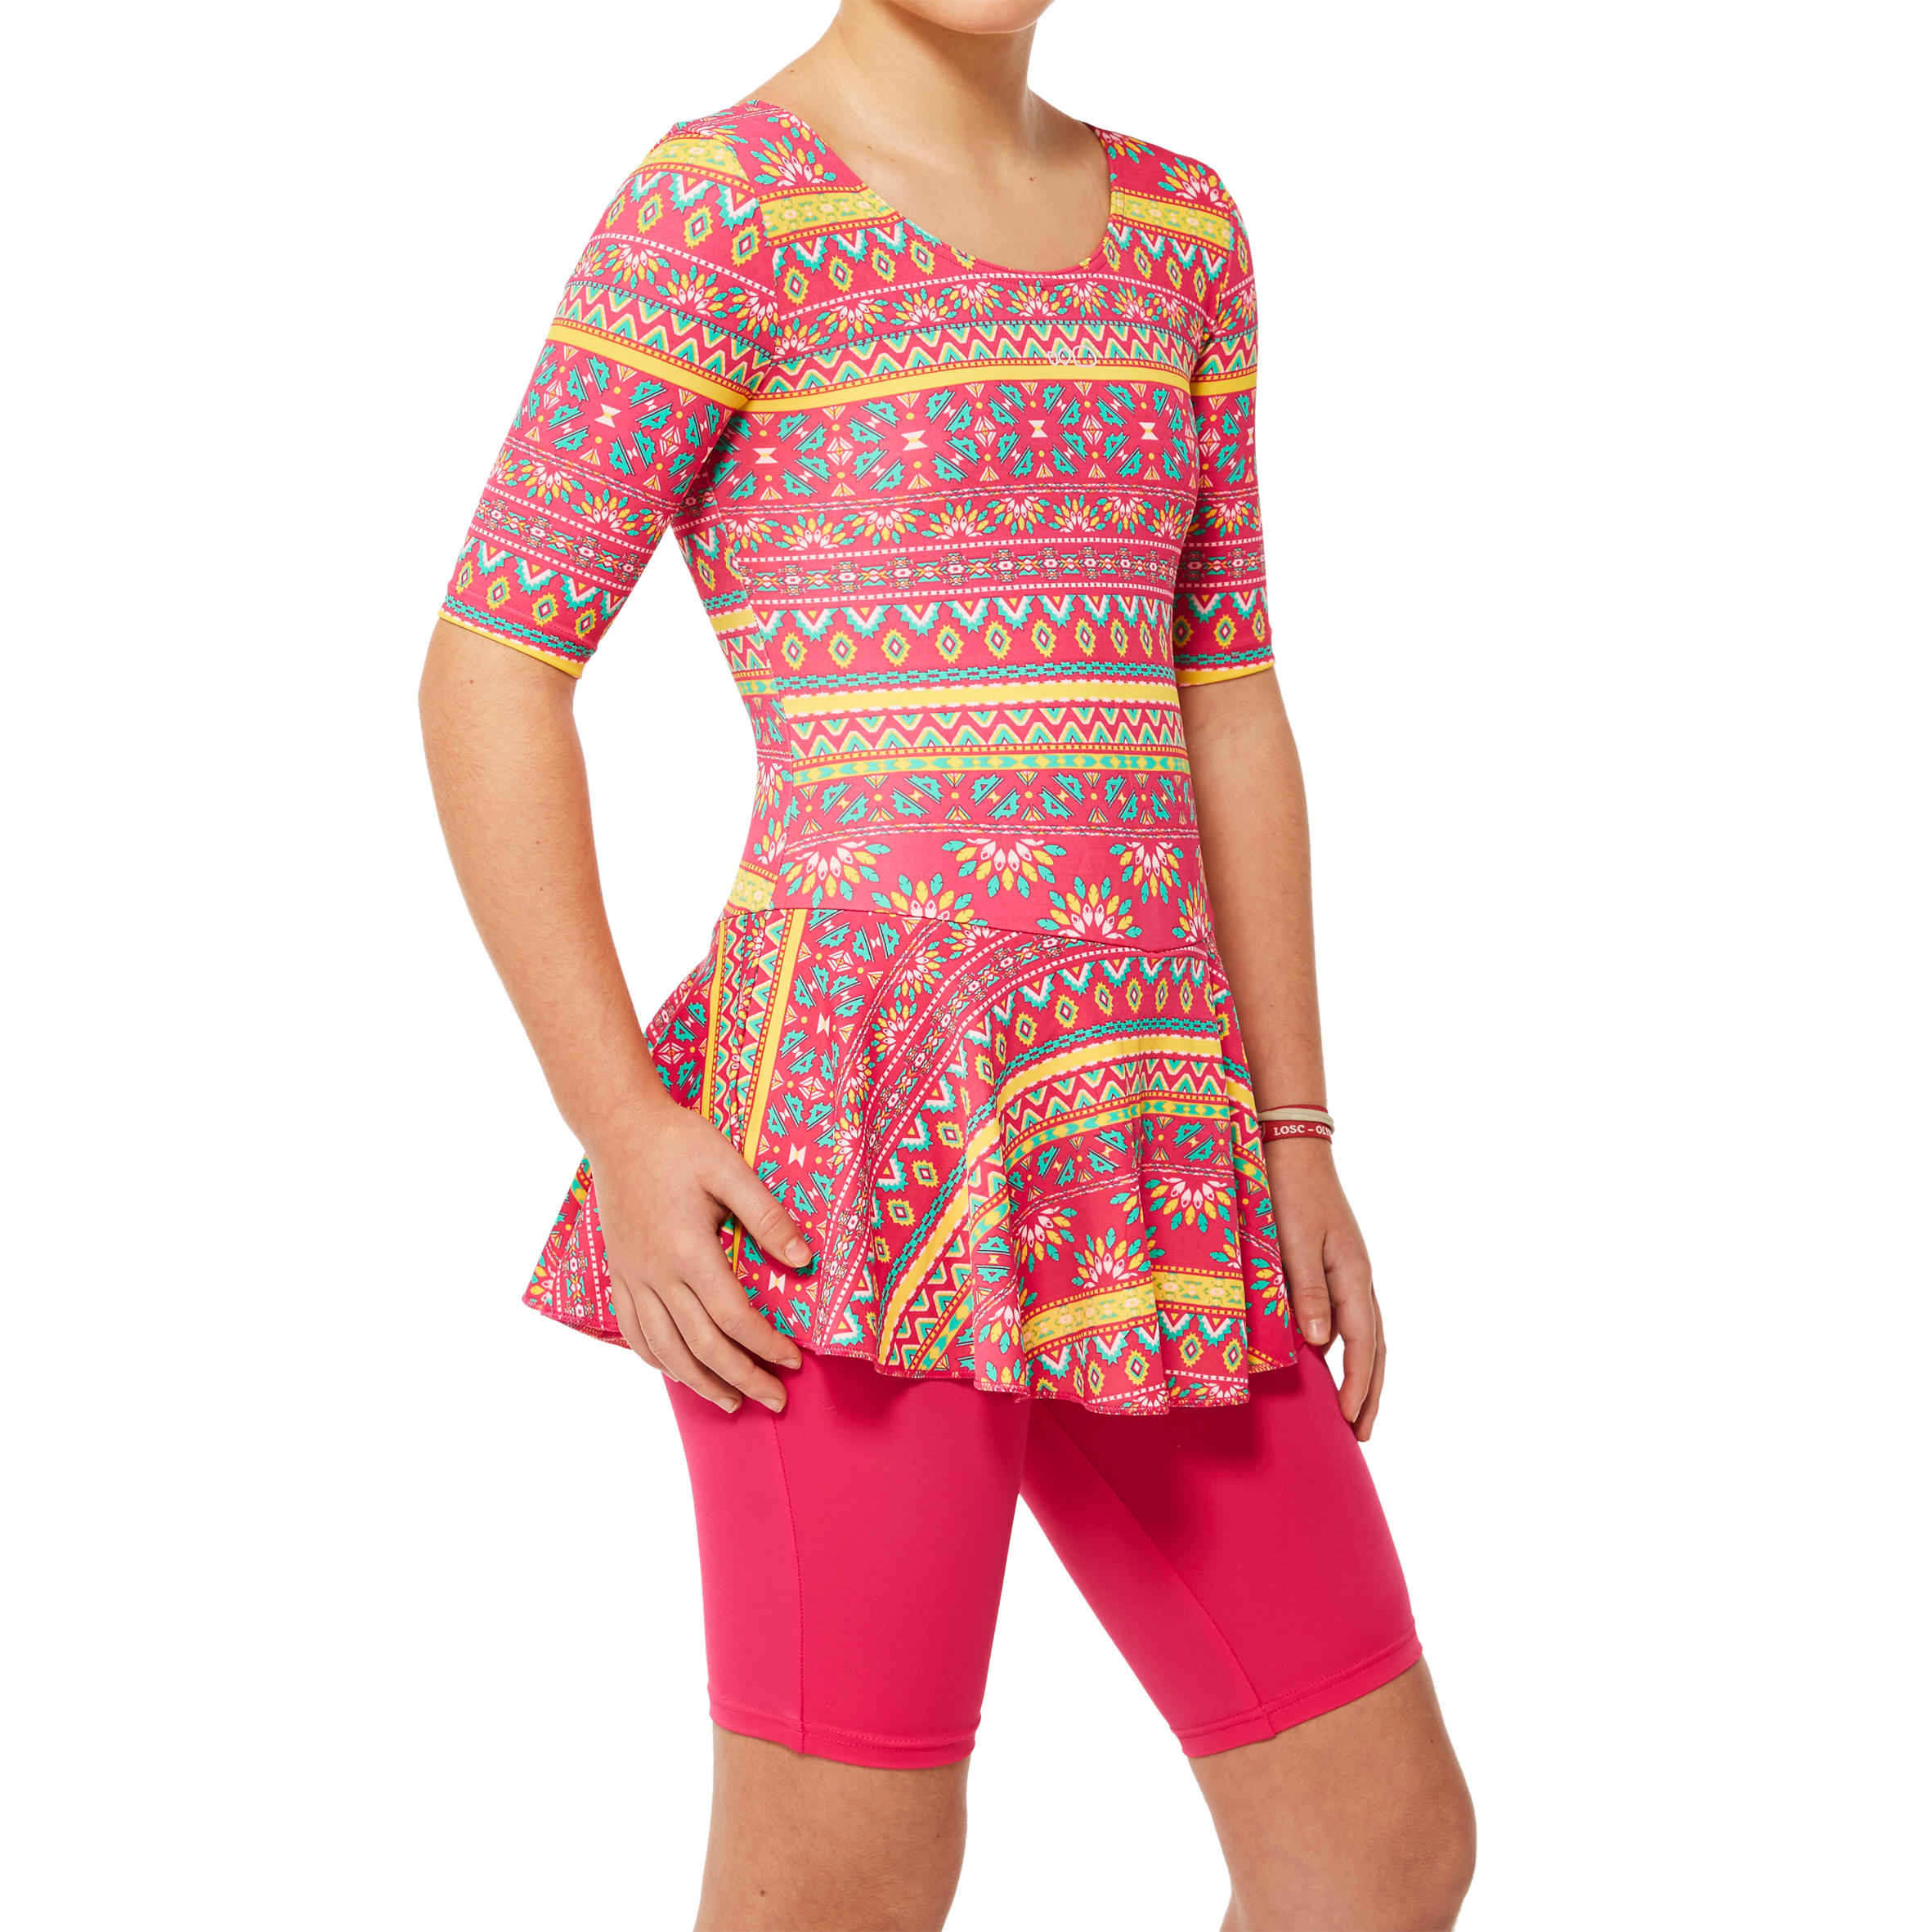 NABAIJI by Decathlon Audrey Full Body Geometric Print Girls Swimsuit - Buy  NABAIJI by Decathlon Audrey Full Body Geometric Print Girls Swimsuit Online  at Best Prices in India | Flipkart.com